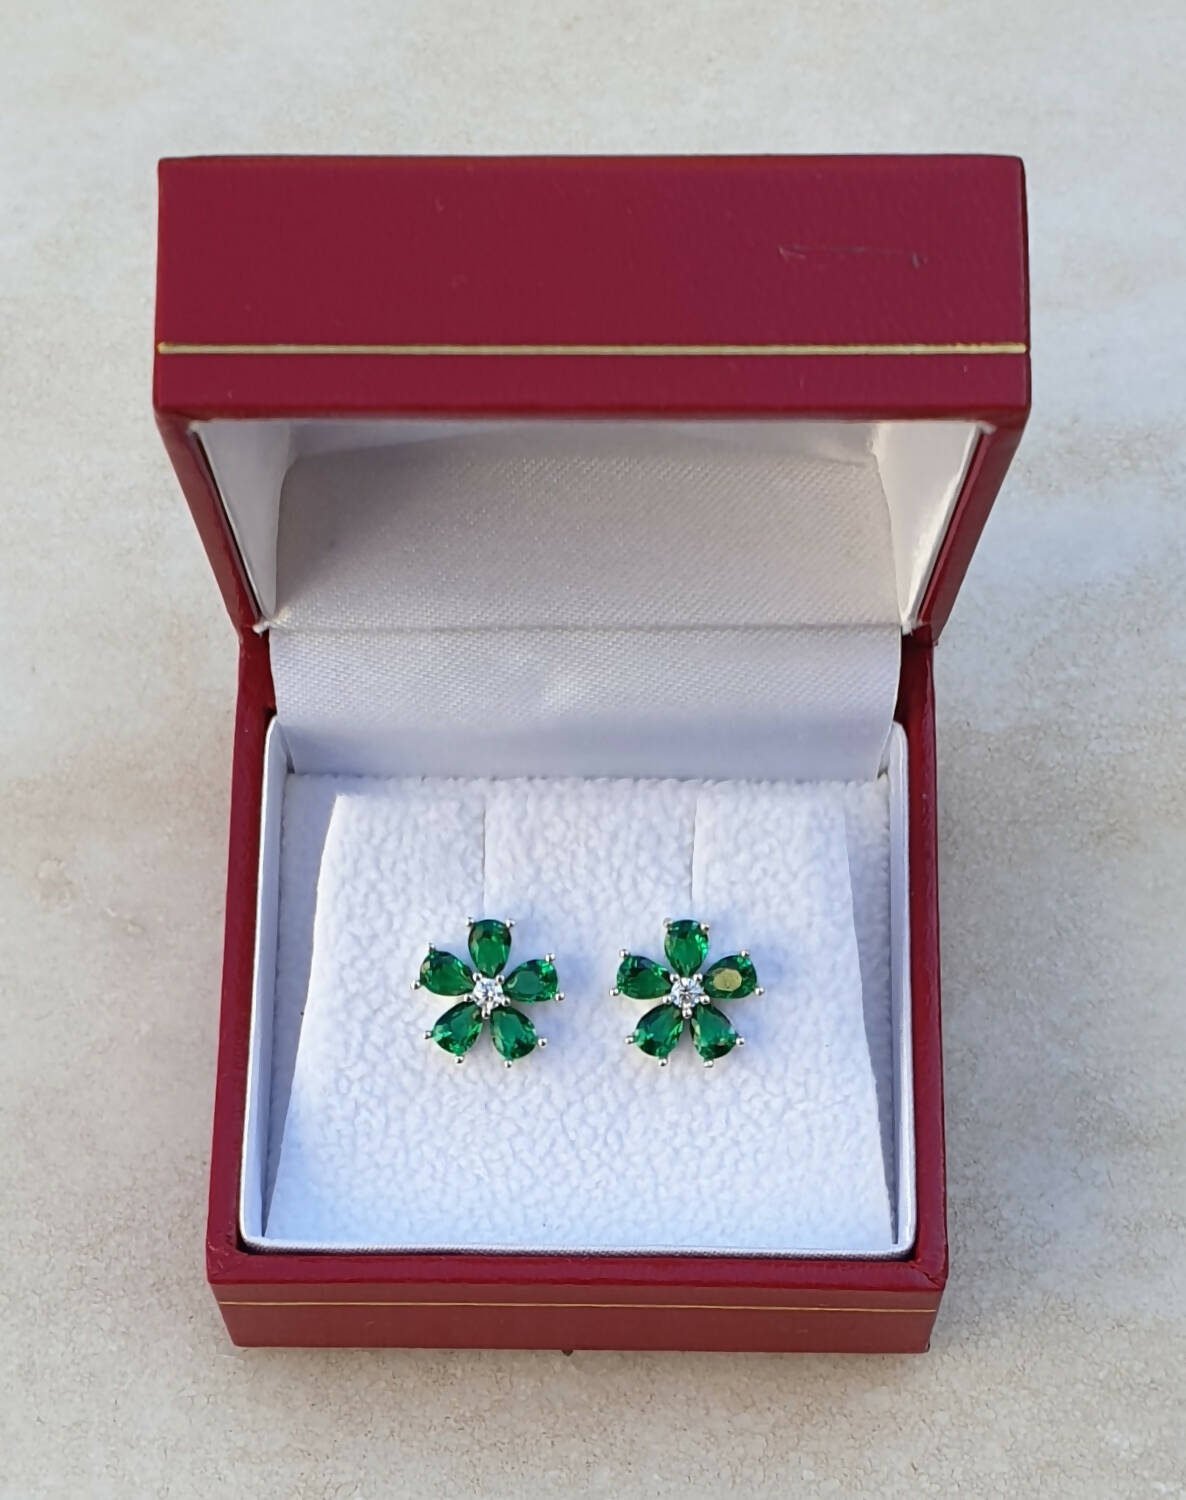 Masonic Earring – Forget Me Not 925K Silver With Green Stones - Bricks Masons